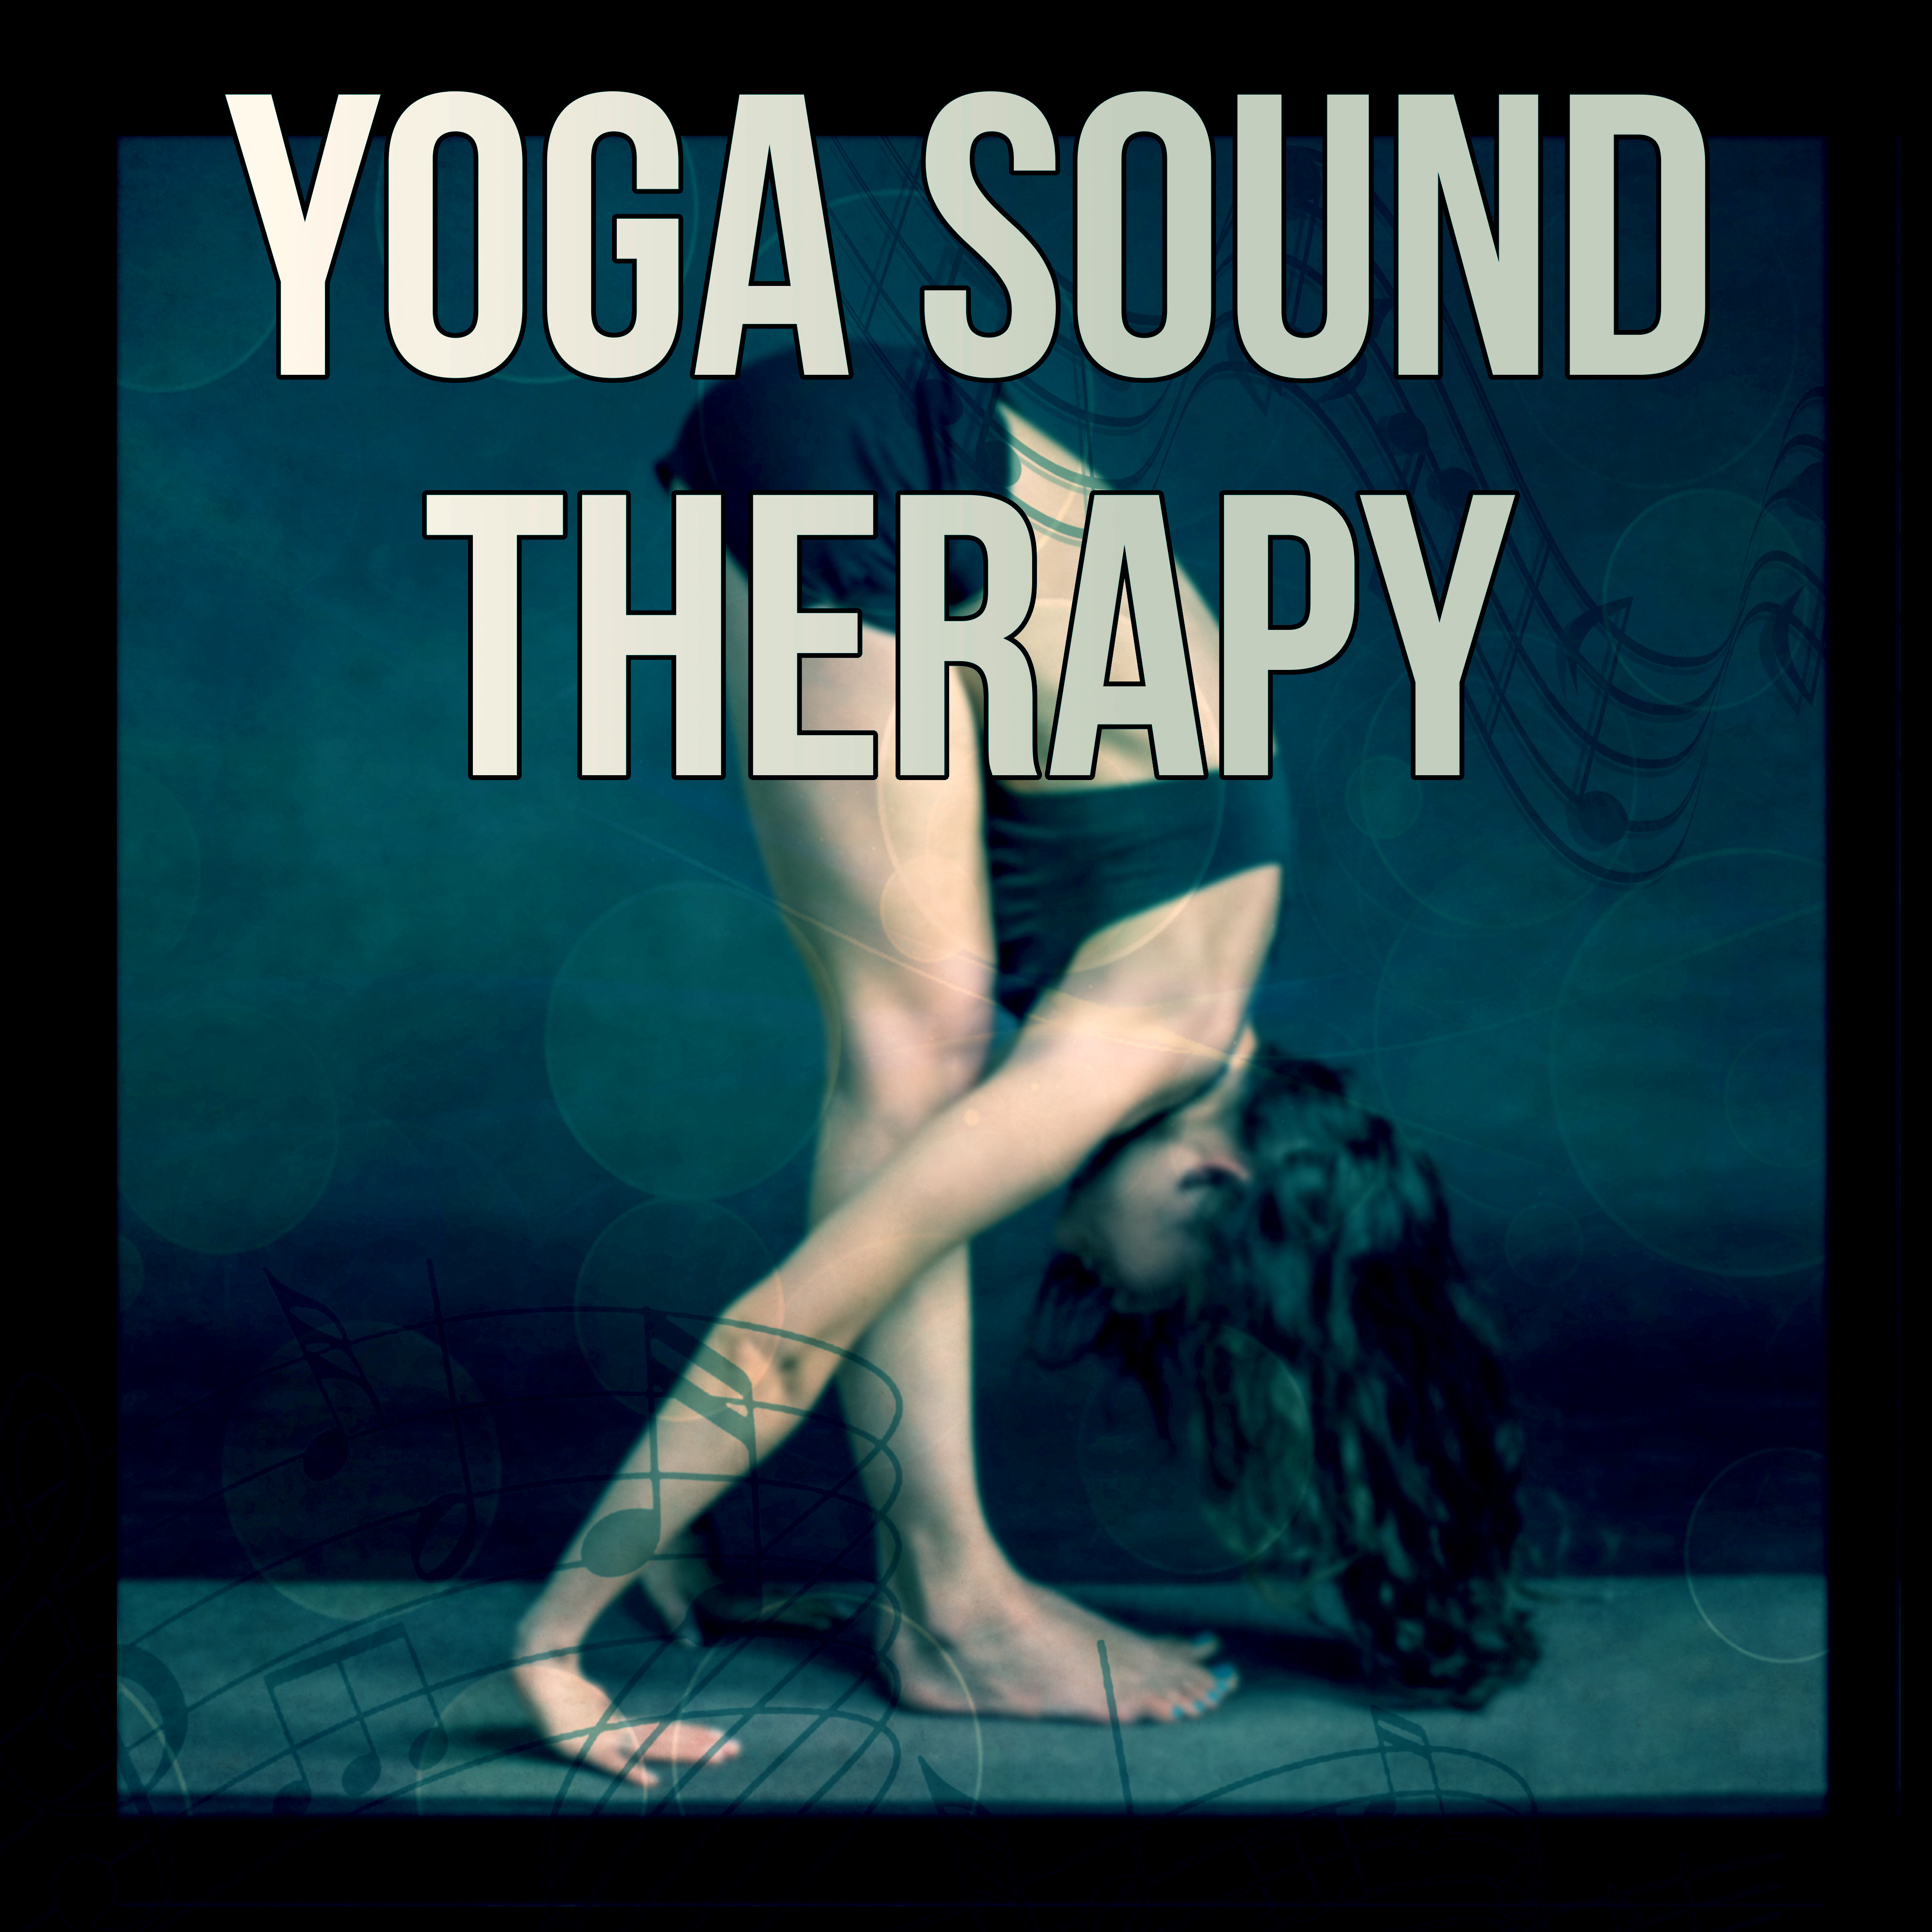 Yoga Sound Therapy - Relieving Insomnia, Healing Massage, Restful Sleep, Lullabies for Relaxation